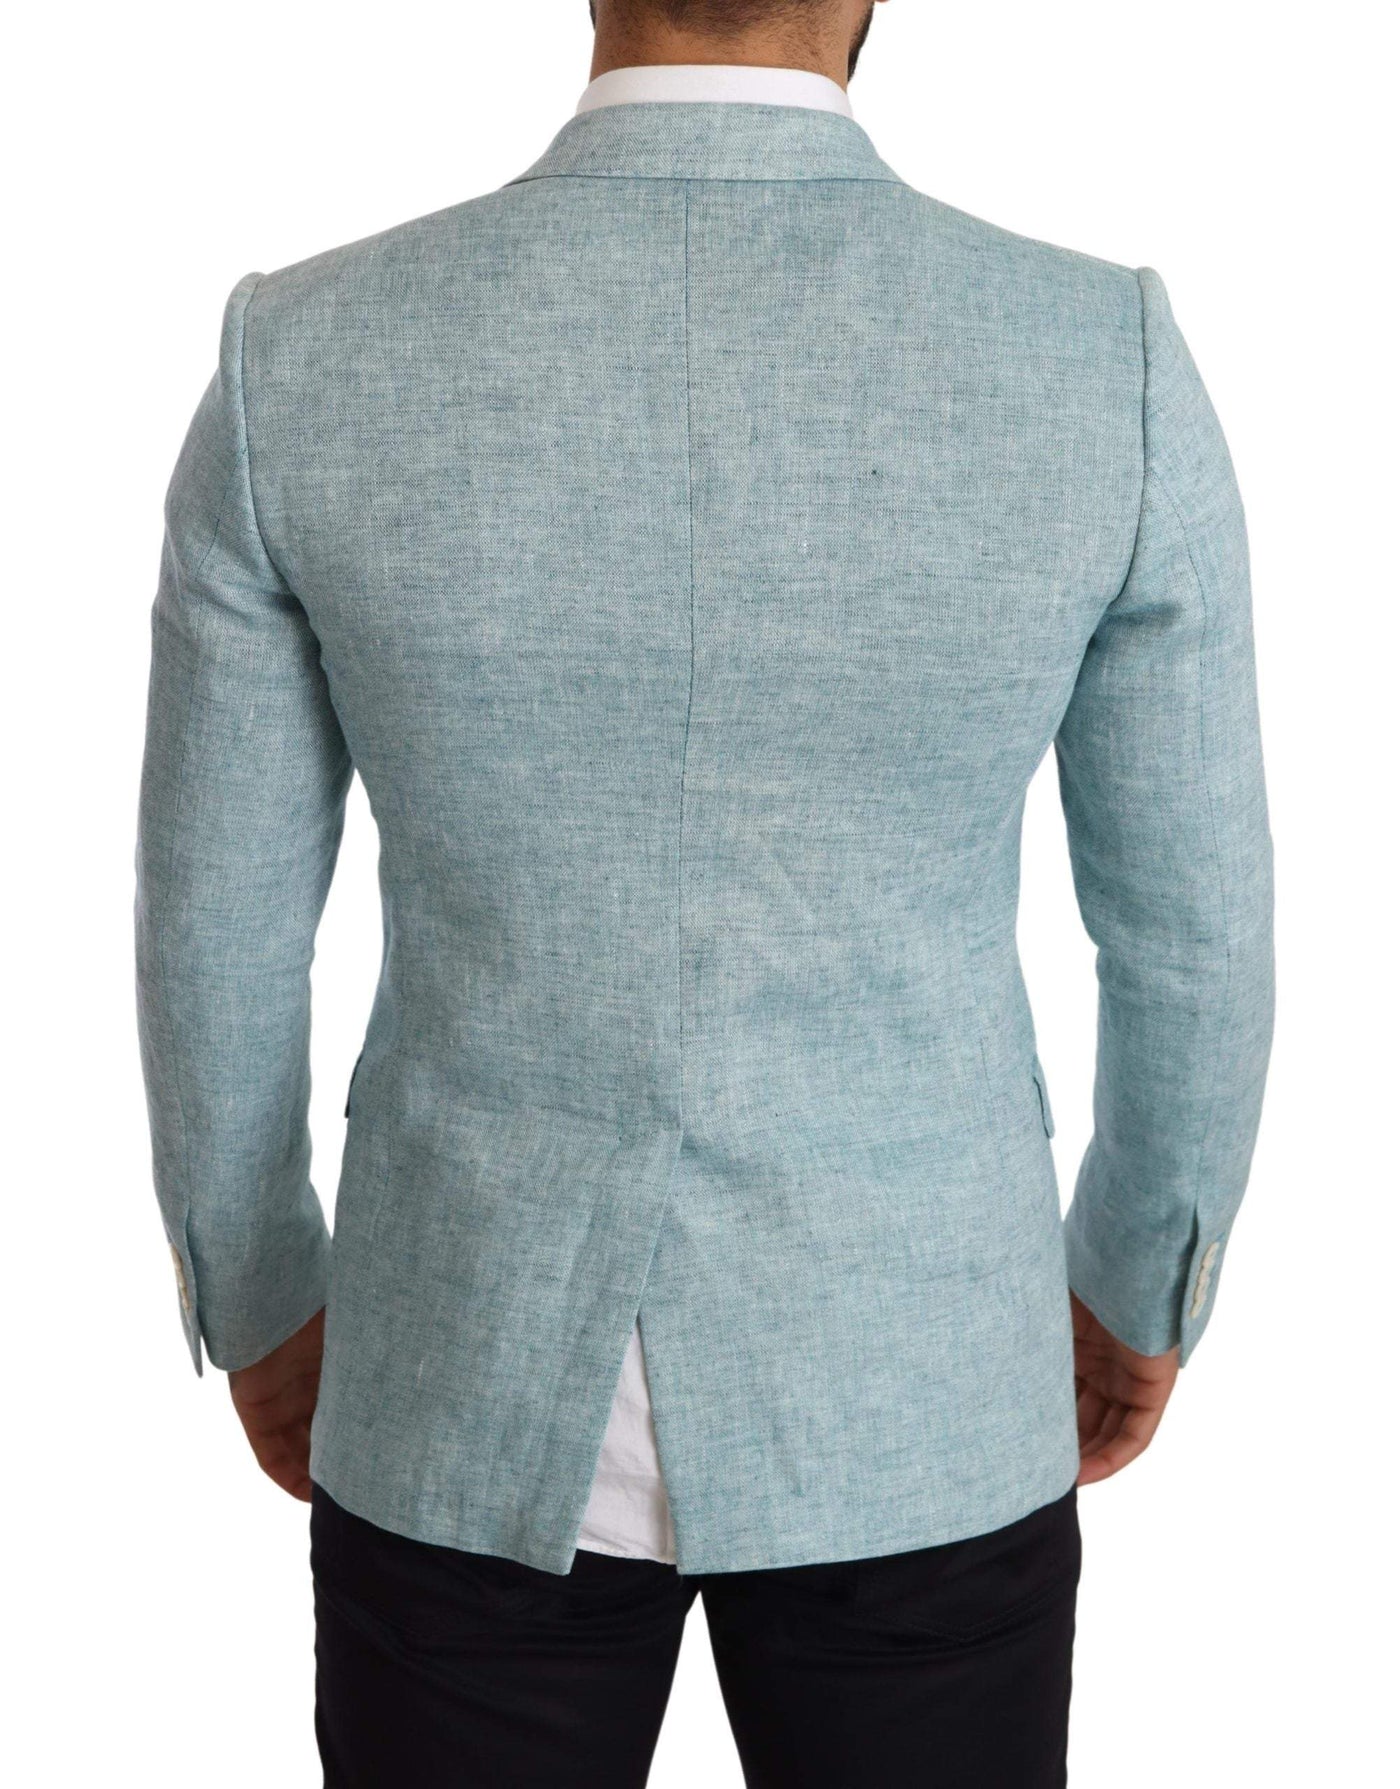 Dolce & Gabbana Blue Slim Fit Linen Coat TAORMINA Blazer #men, Blazers - Men - Clothing, Dolce & Gabbana, feed-agegroup-adult, feed-color-Blue, feed-gender-male, IT46 | S, Light Blue at SEYMAYKA